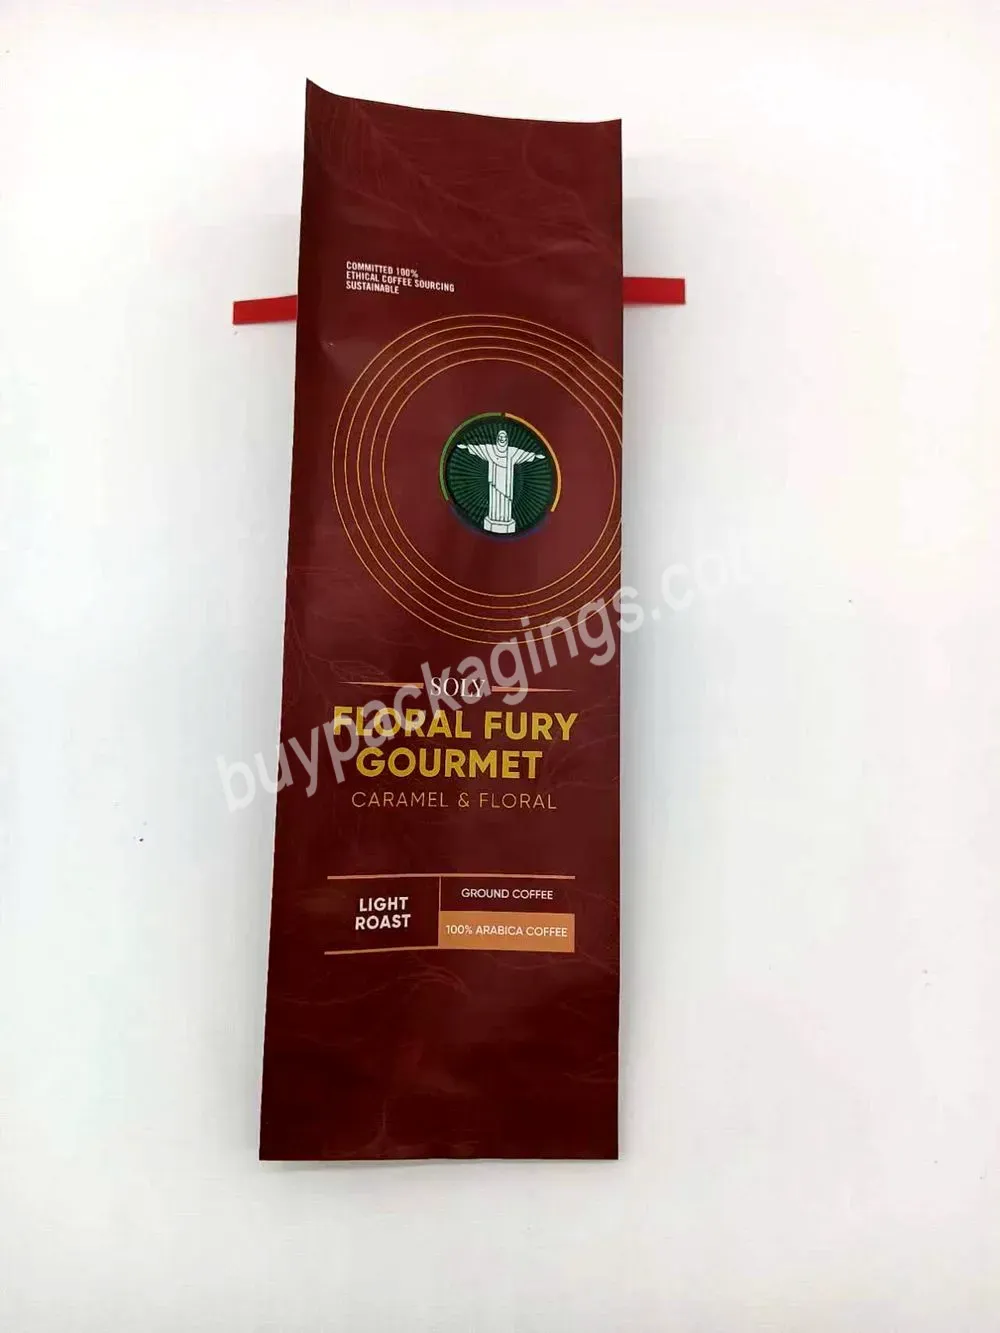 Recycle 250g 500g 1000g 2kg Custom Printed Eight Side Seal Flat Bottom Coffee Beans Packaging Bags With Valve And Zipper